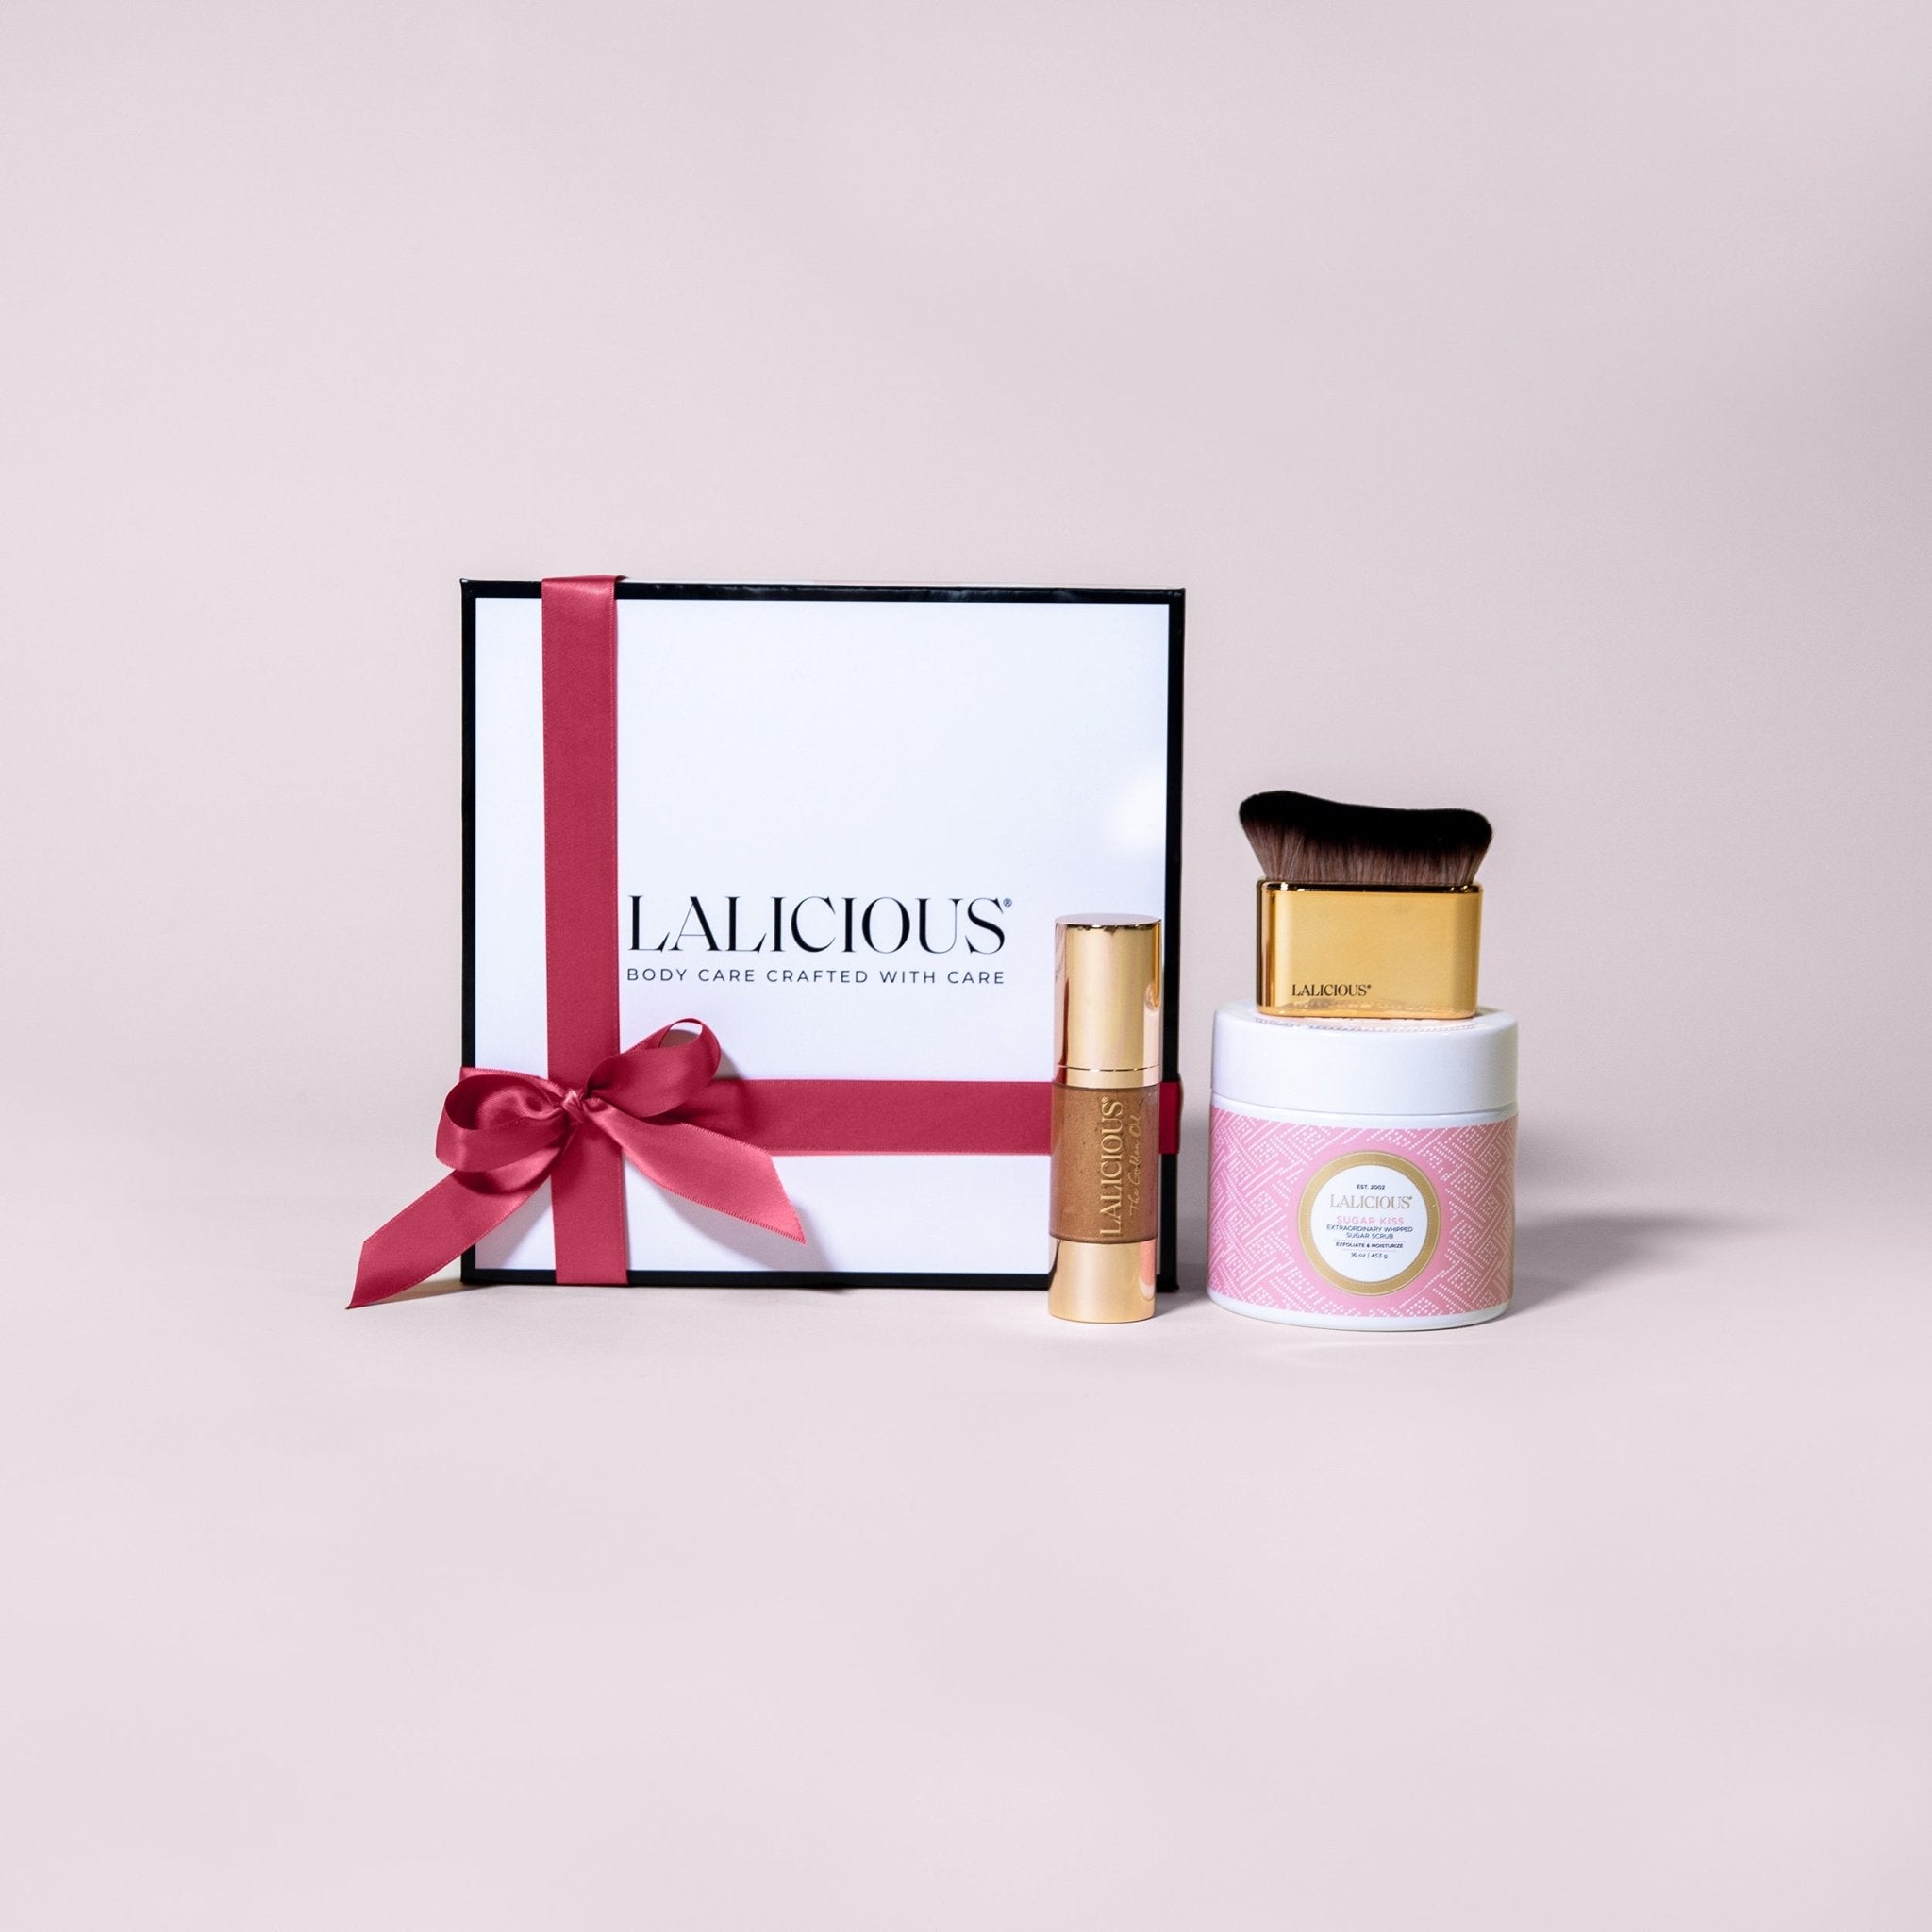 Covered In Kiss(es) Gift Set - LALICIOUS